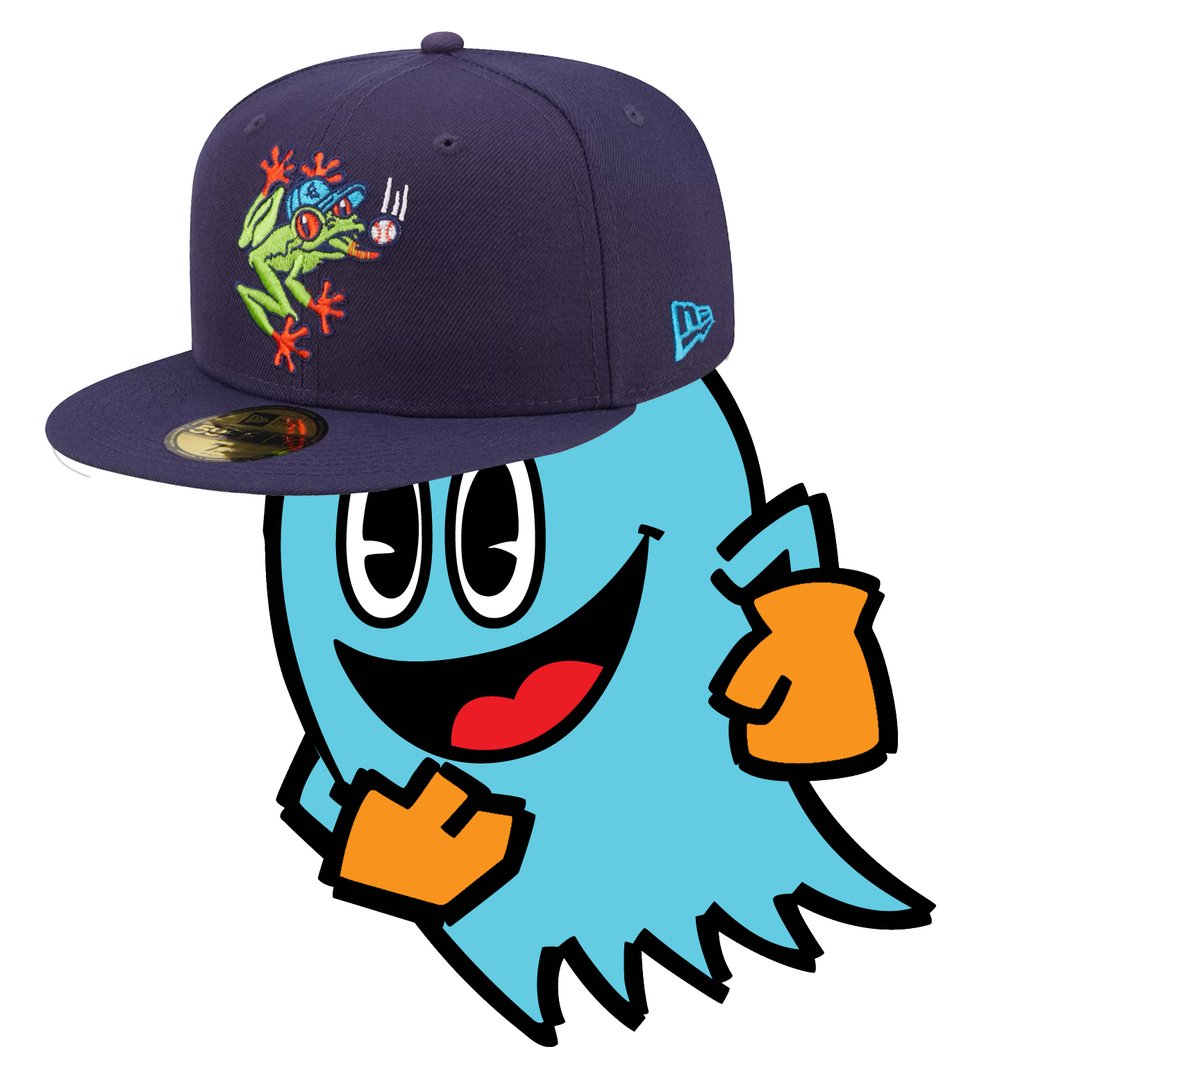 The AquaSox will start the 10th with Axel Sachez as the ghost runner.